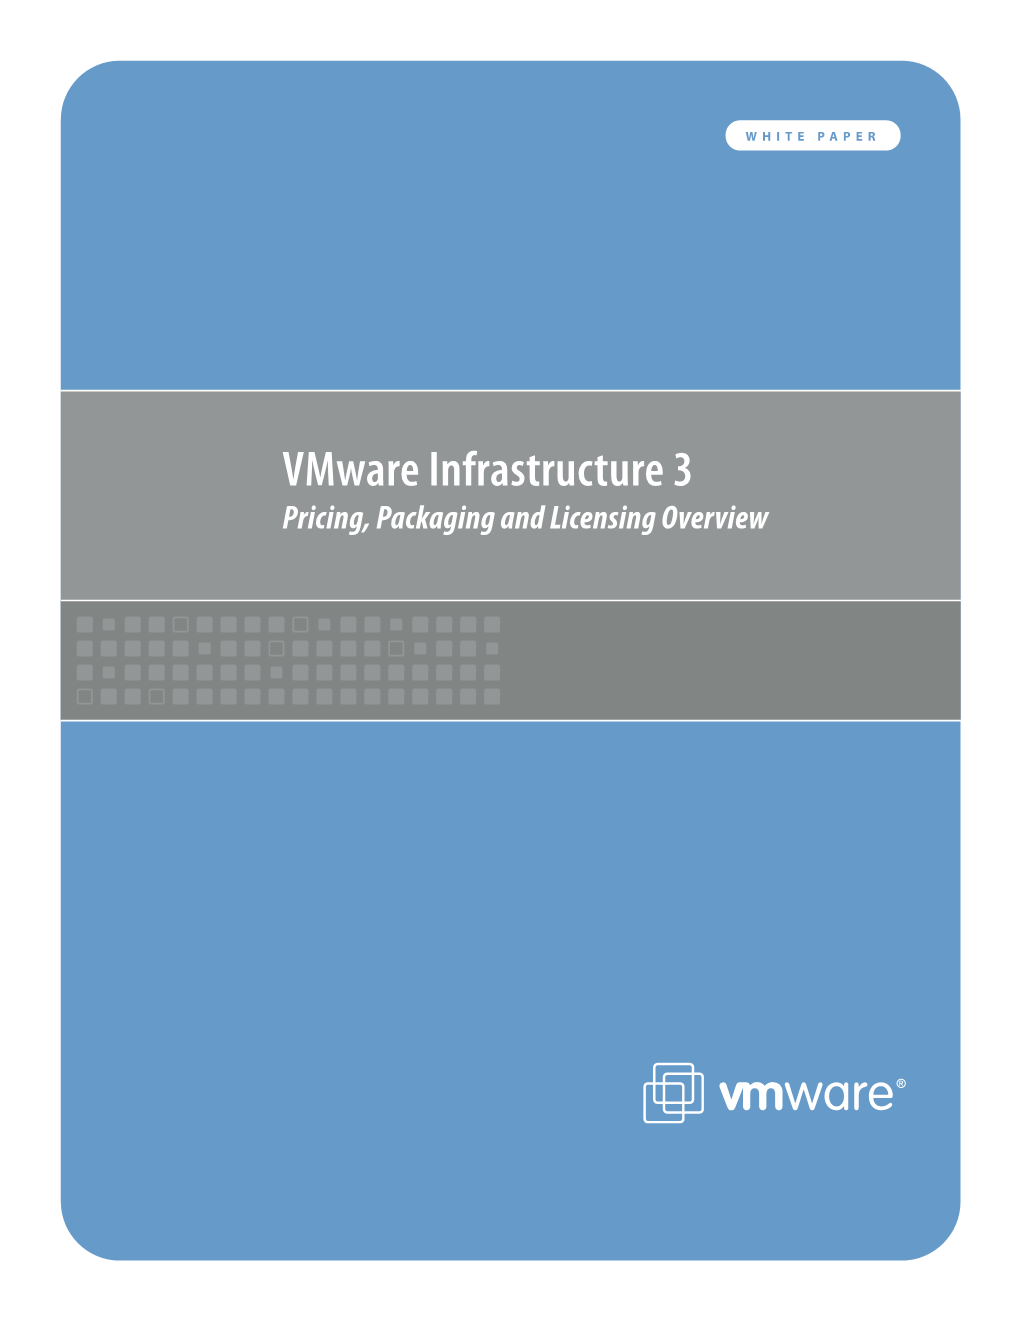 Vmware Infrastructure 3 Pricing, Packaging and Licensing Overview Vmware White Paper